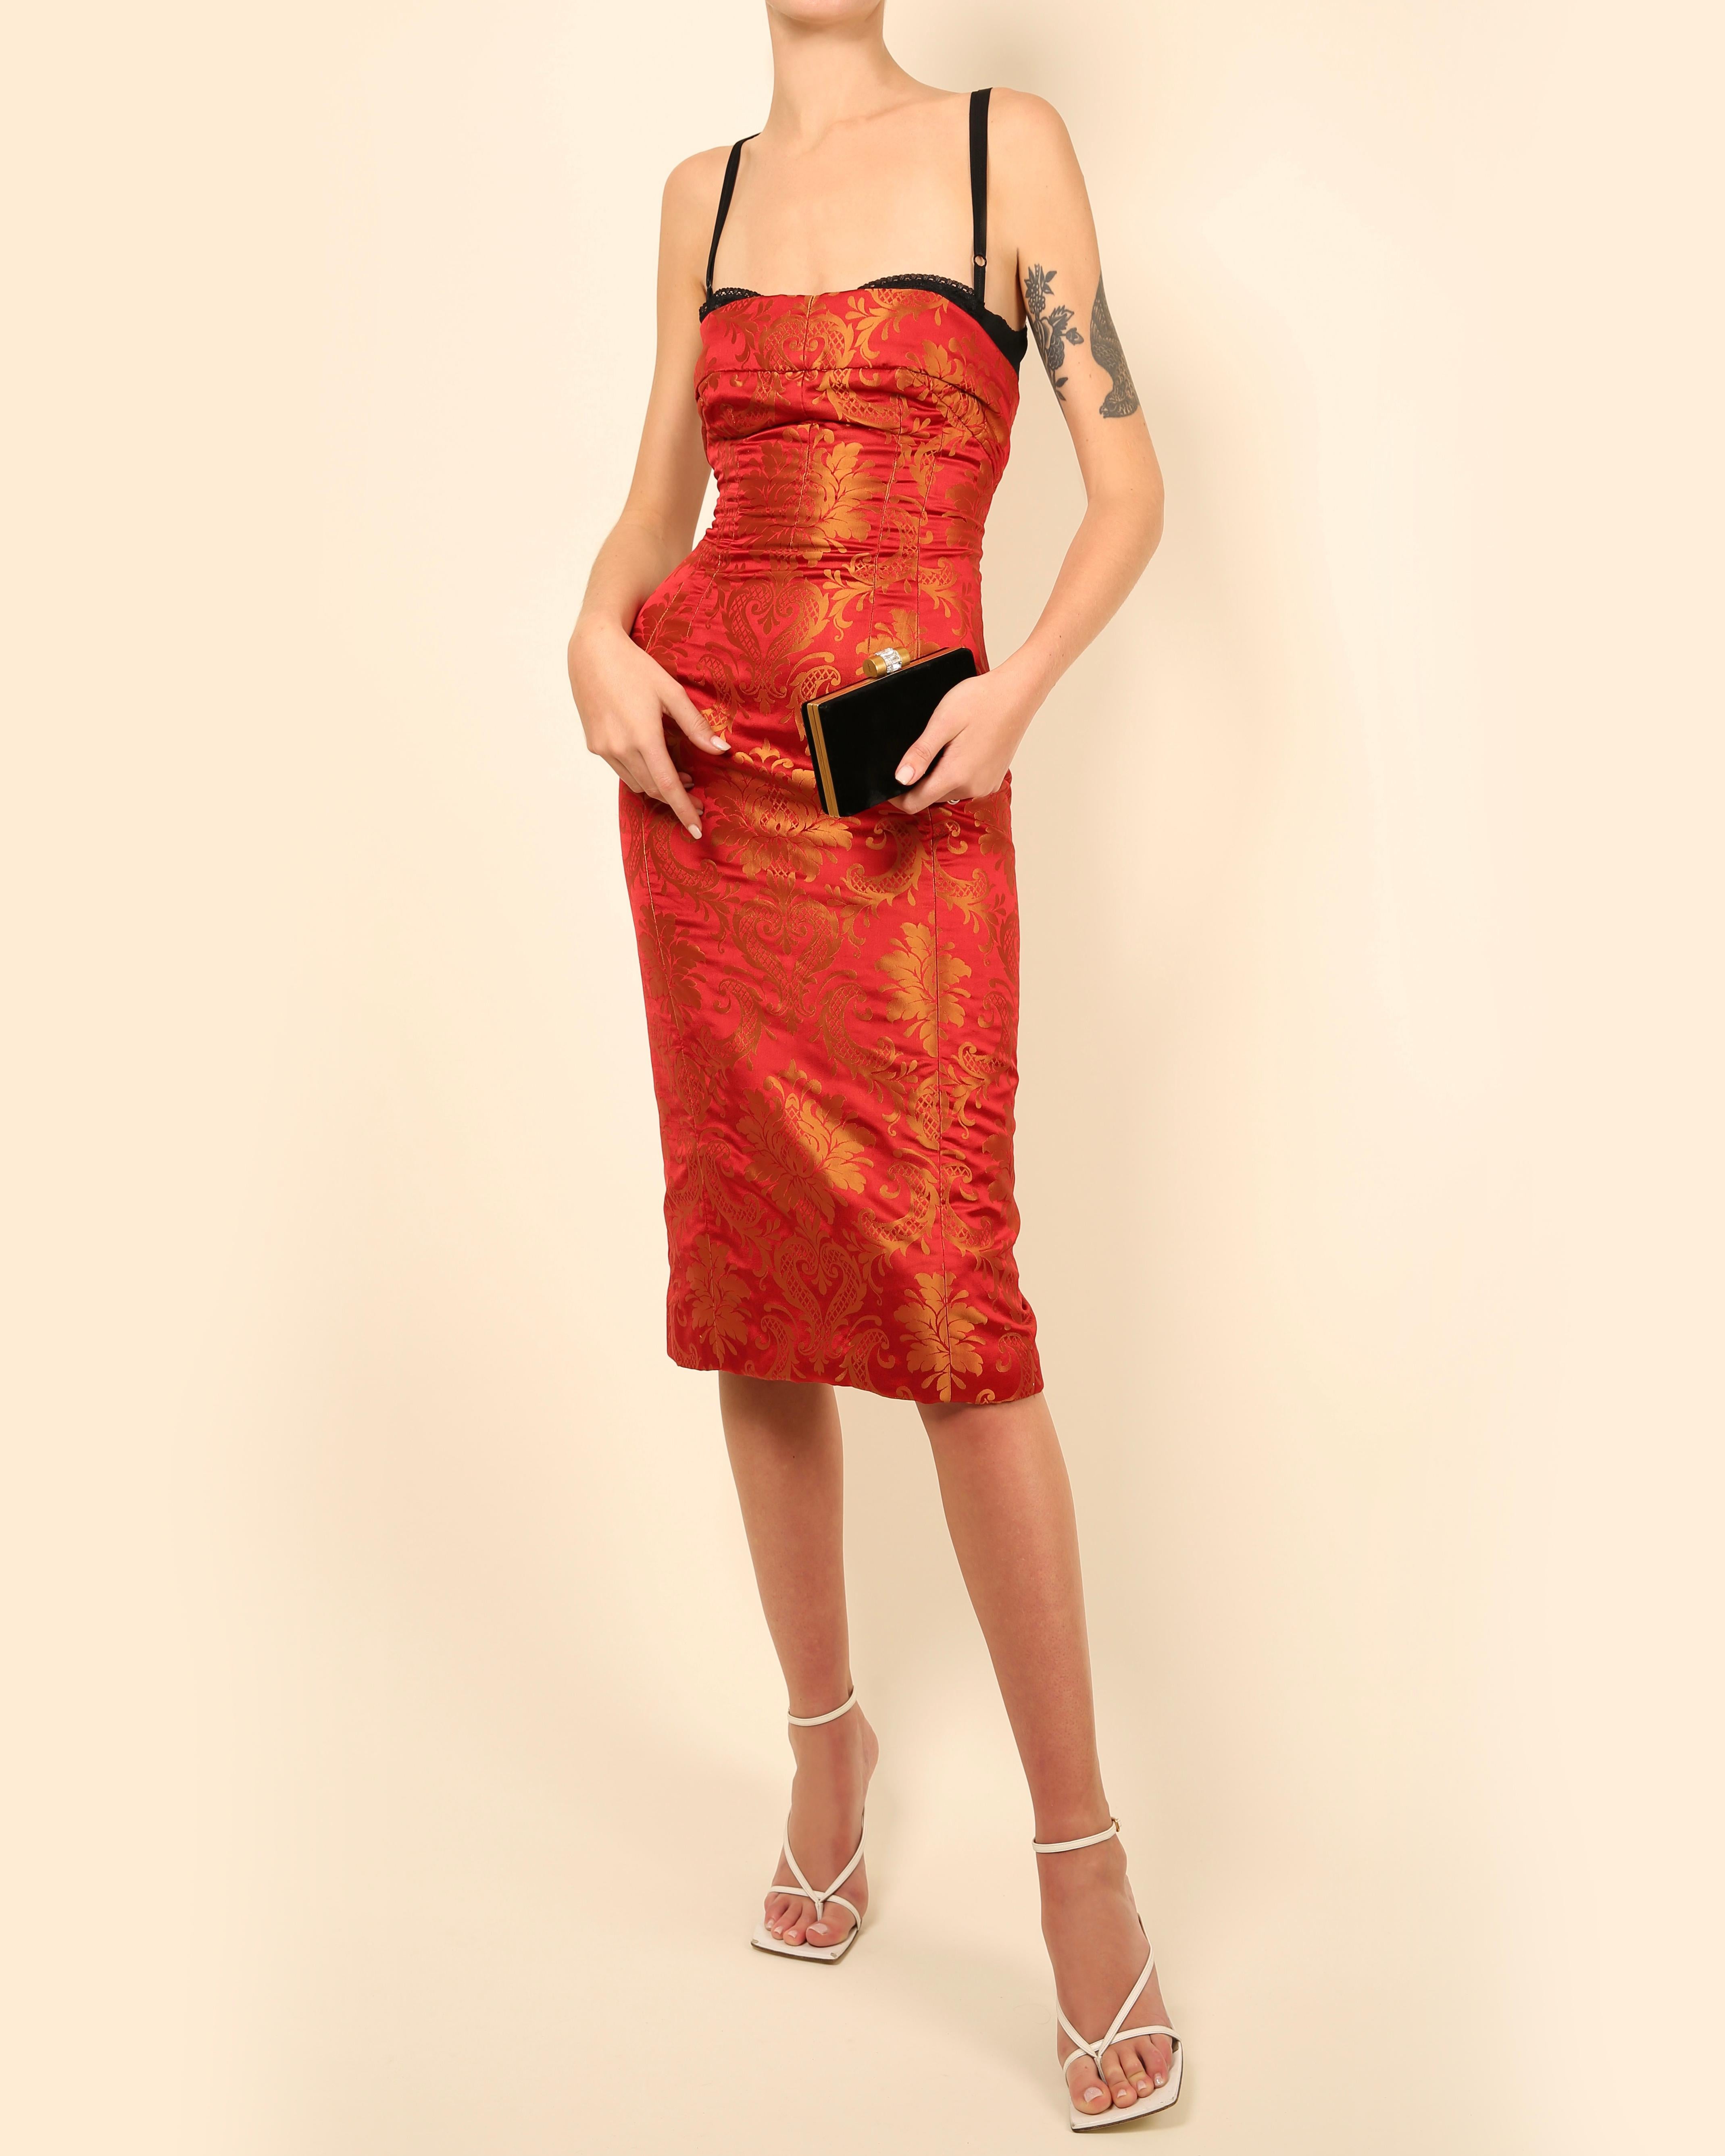 Women's Dolce & Gabbana red gold floral print oriental asian style bustier midi dress For Sale